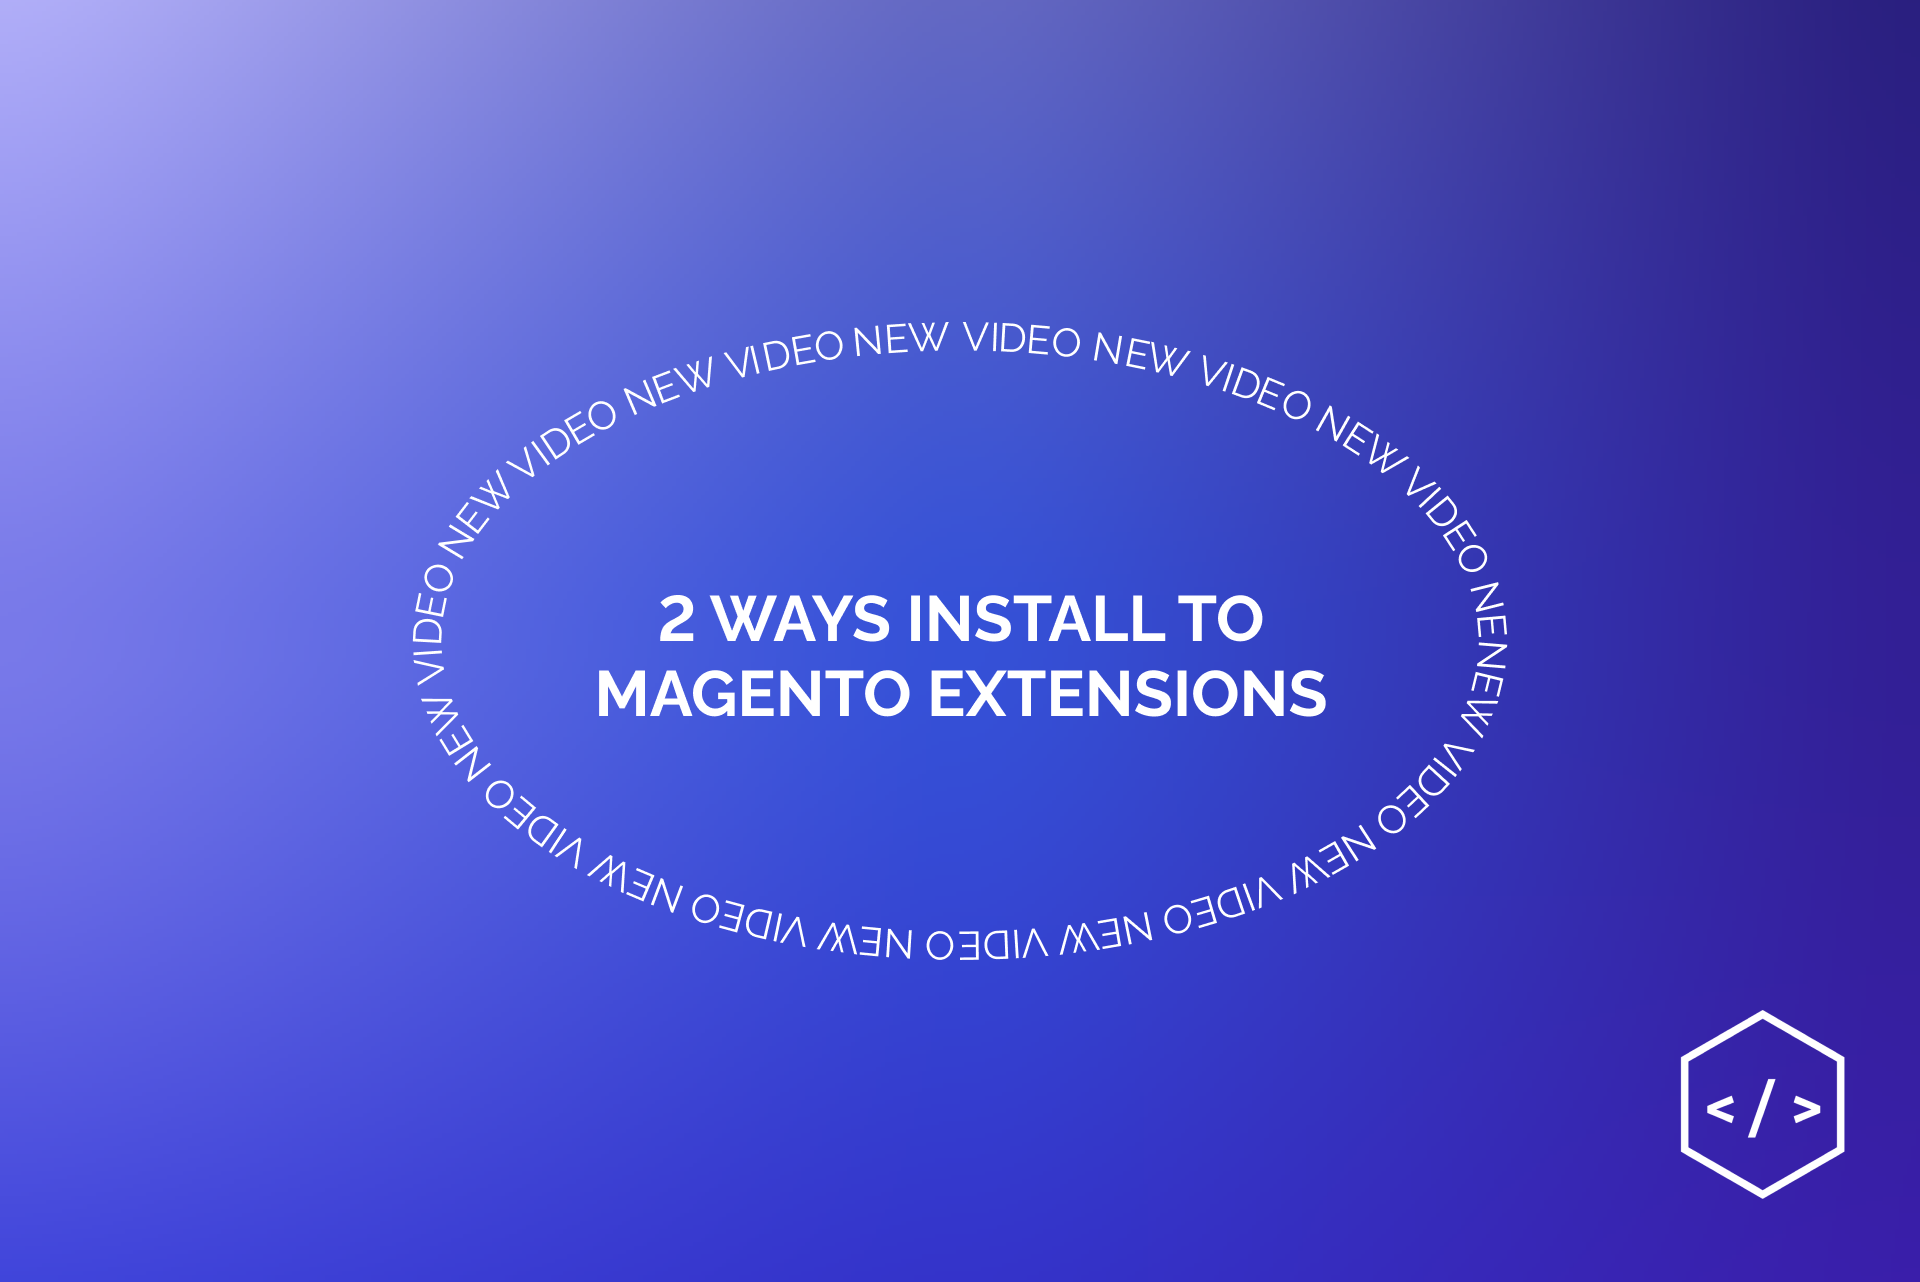 How can you install Magento extensions in 2 ways?